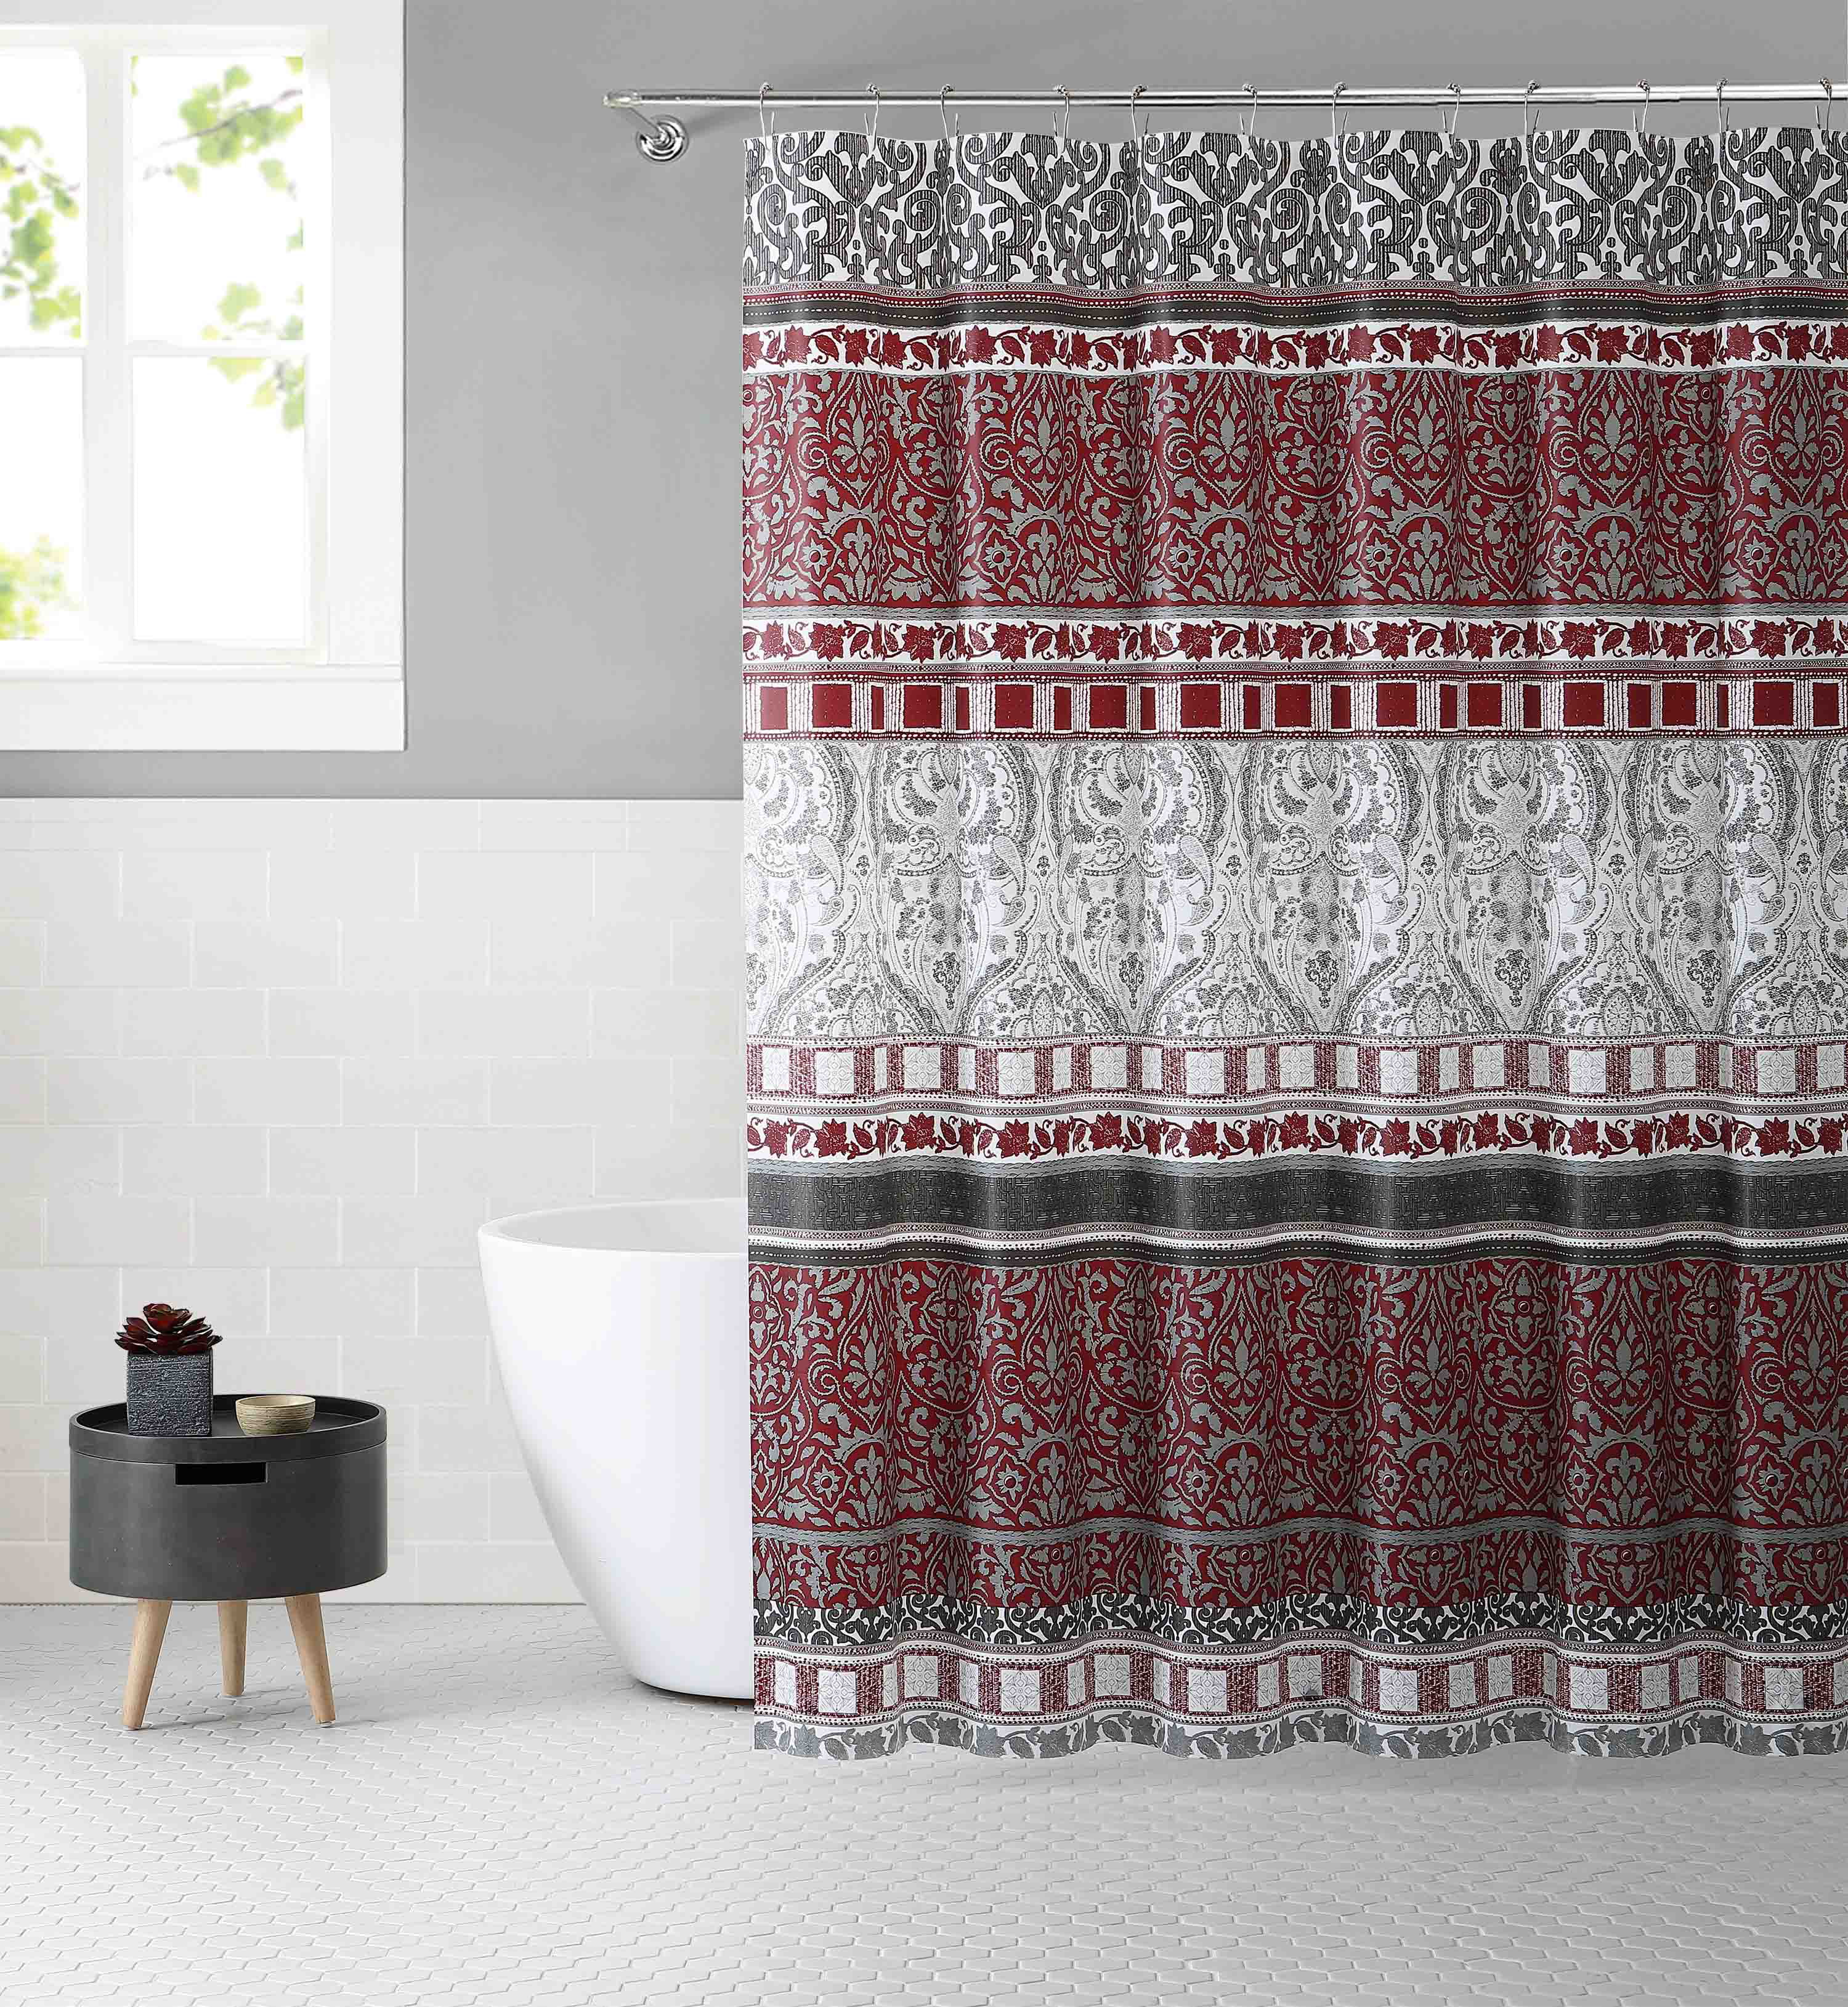 Water-Repellent Rustproof Bath Curtain 72x72 Non Toxic 100% Durable Polyester Shower Curtain Liner Machine Washable,Easy to Install-White ROYACOR Fabric Shower Curtain with 12 Polyresin Hooks